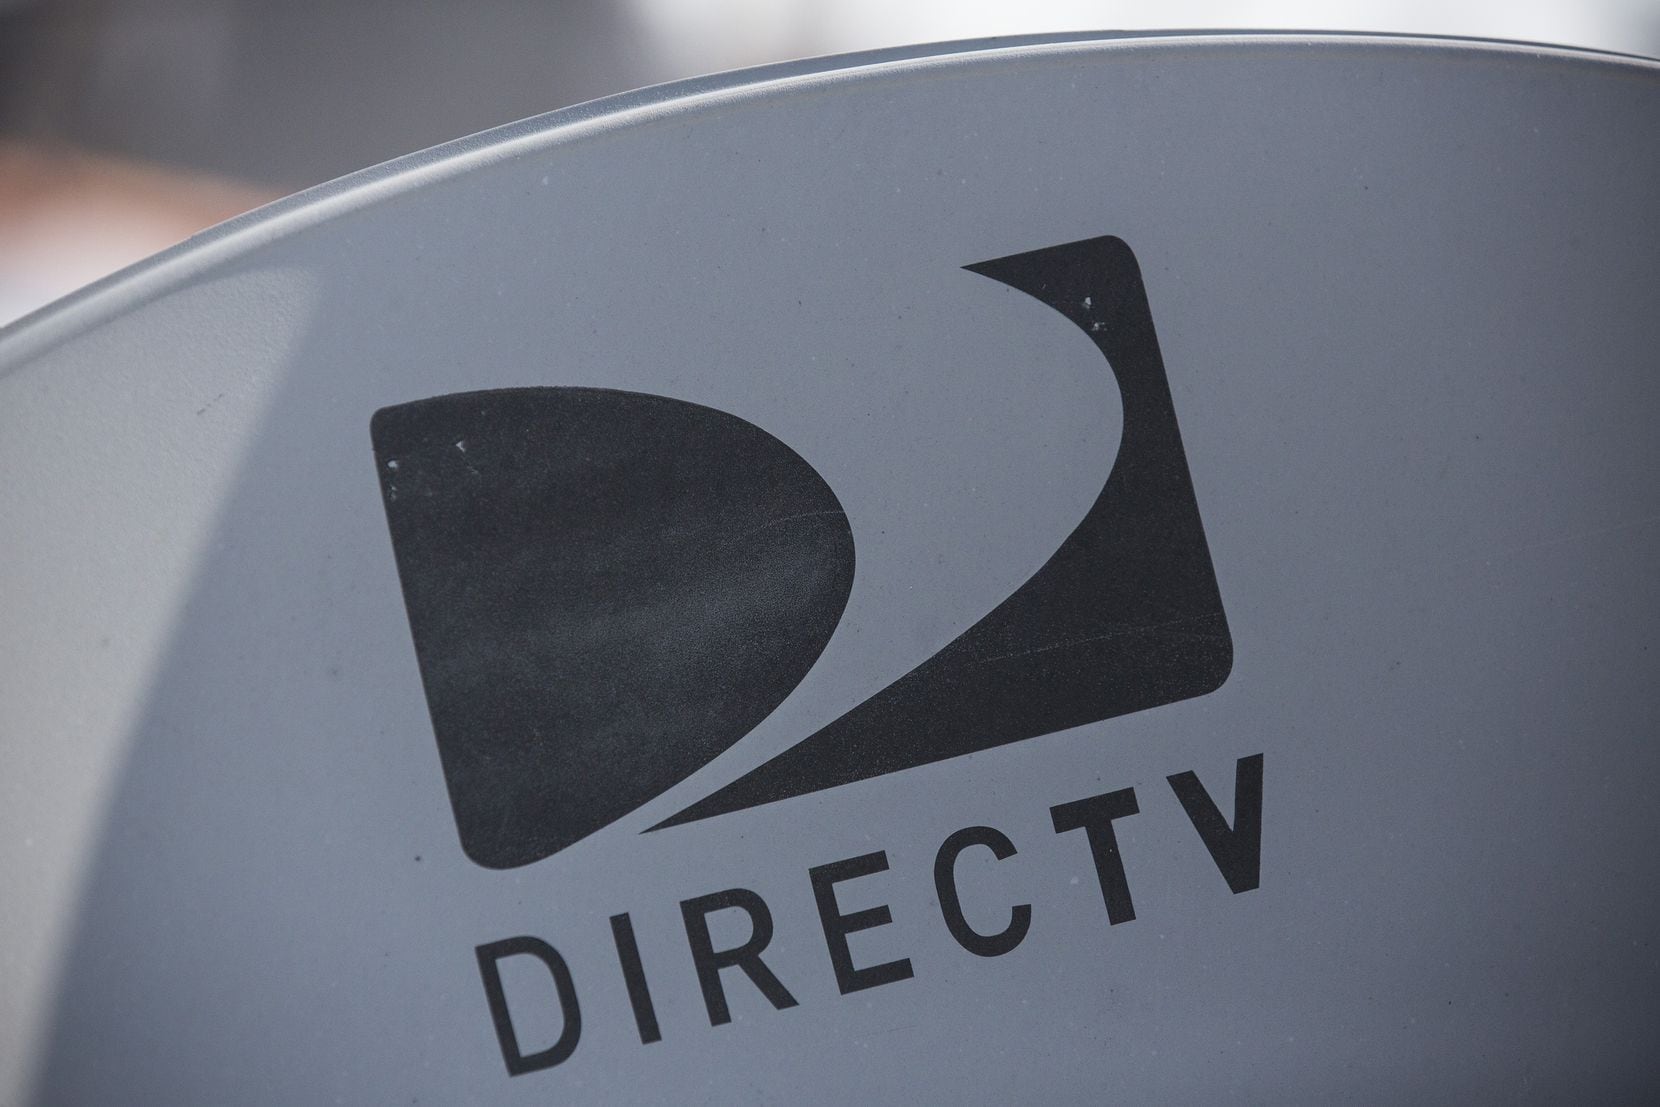 AT&T has been selling off its media assets under new CEO John Stankey. It retained a 70% ownership stake in DirecTV.